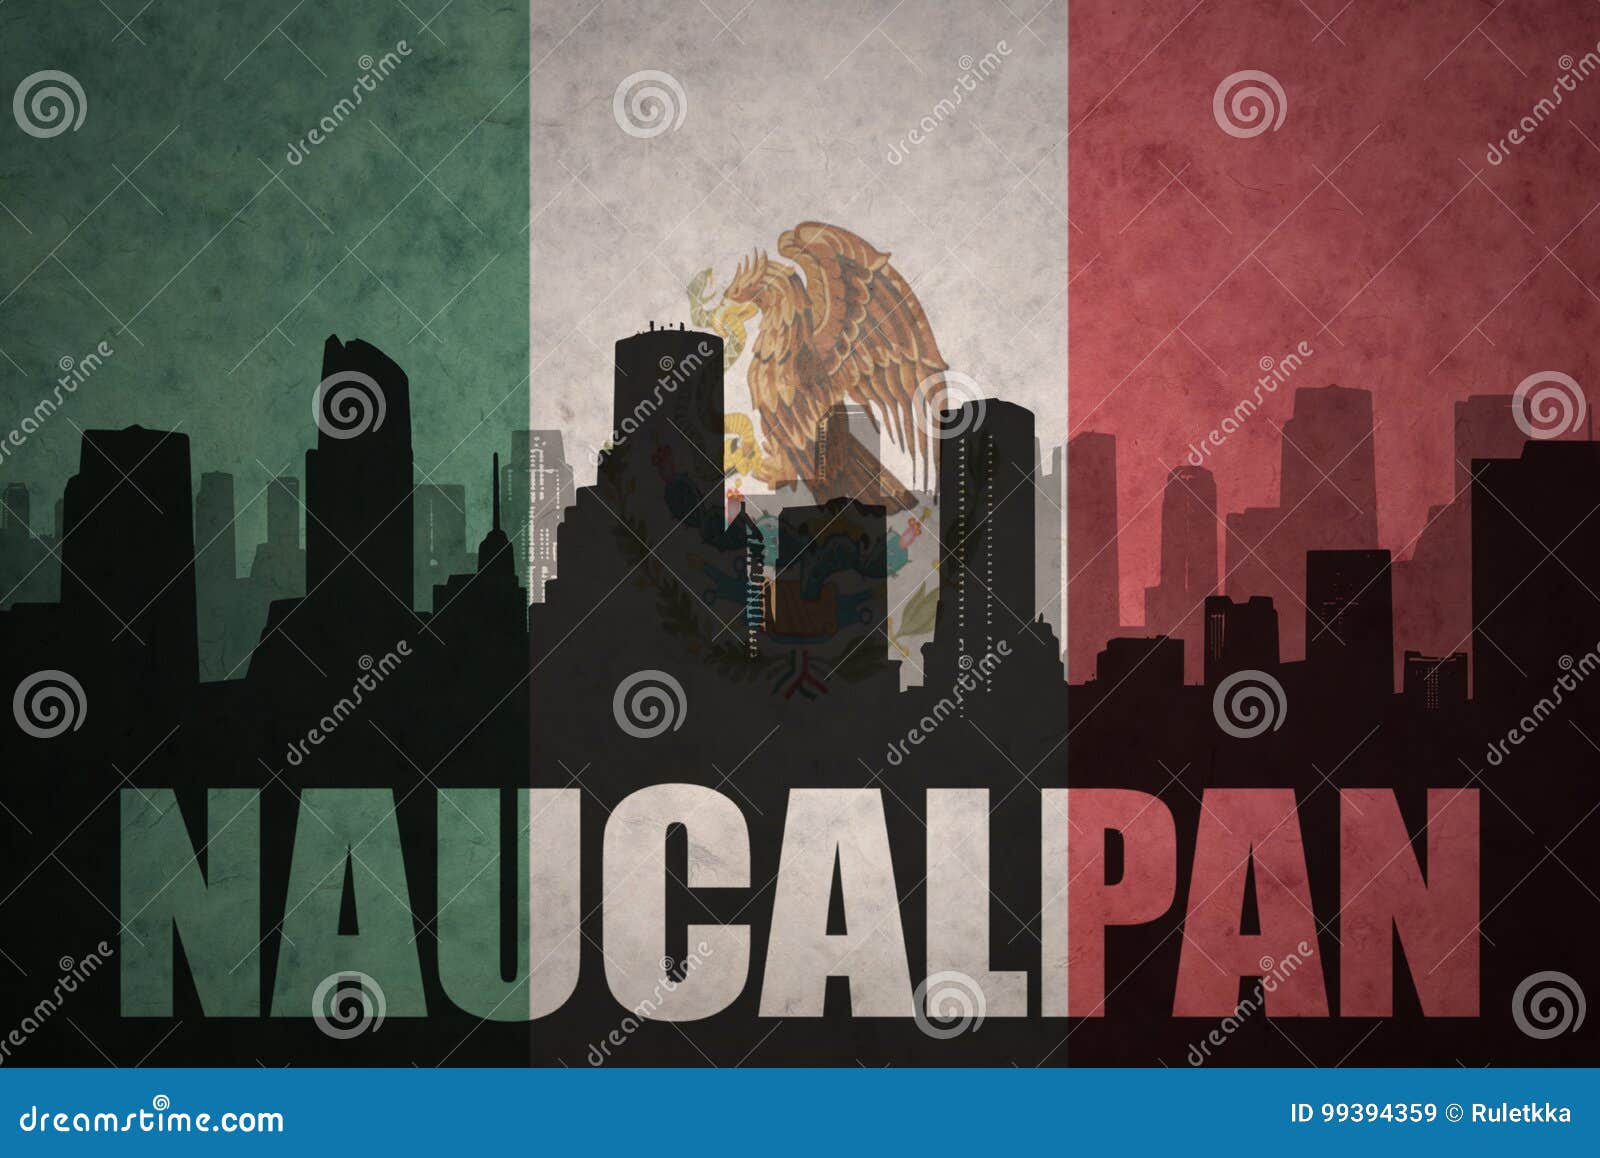 abstract silhouette of the city with text naucalpan at the vintage mexican flag